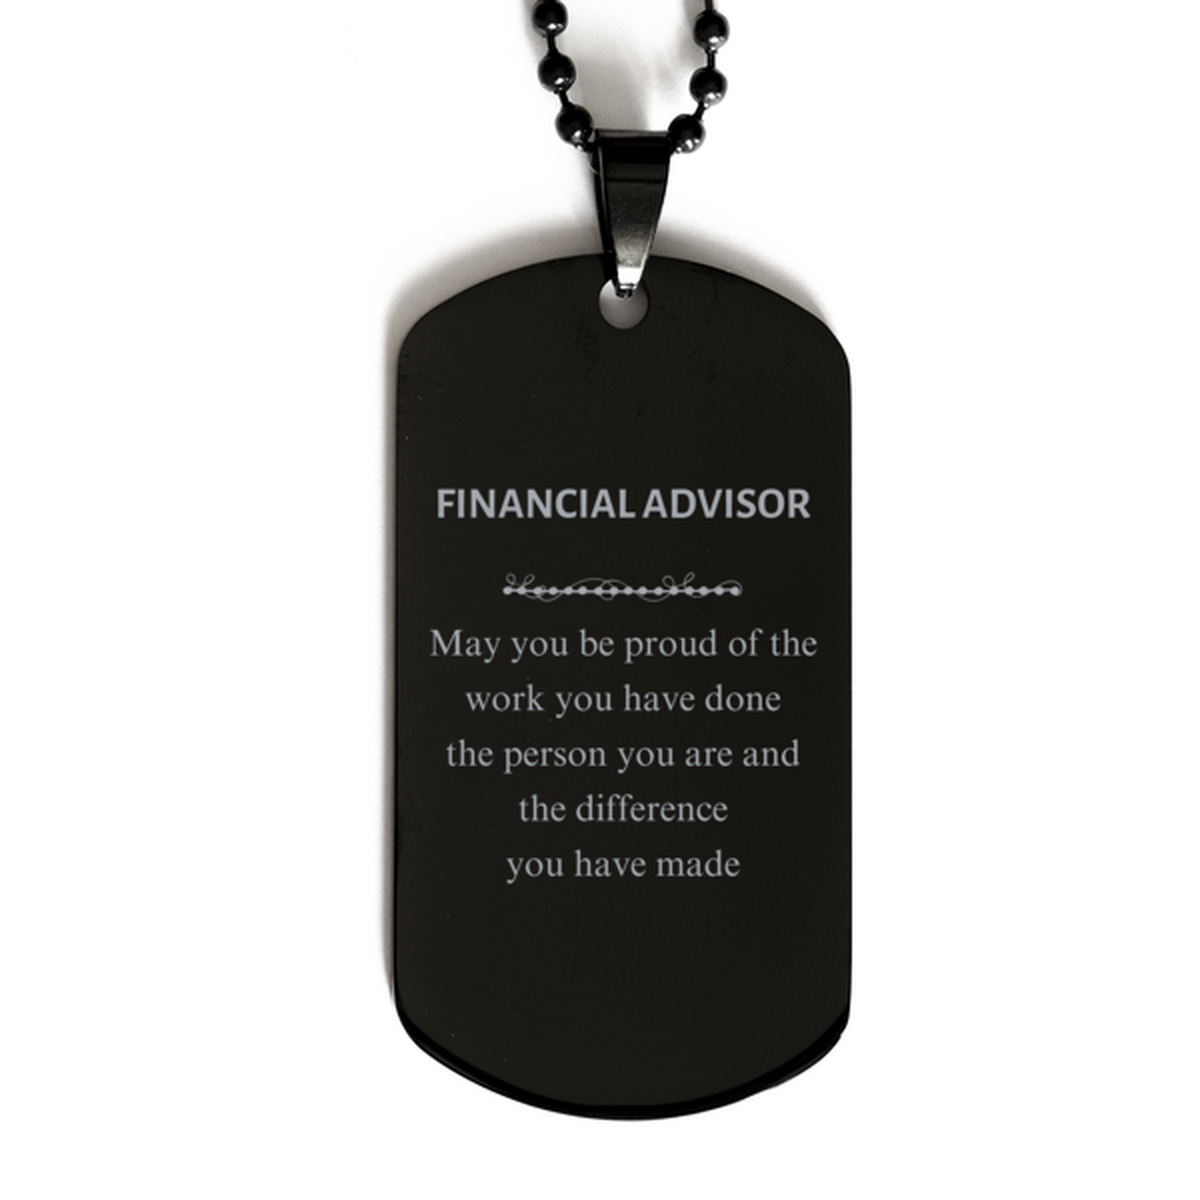 Financial Advisor May you be proud of the work you have done, Retirement Financial Advisor Black Dog Tag for Colleague Appreciation Gifts Amazing for Financial Advisor